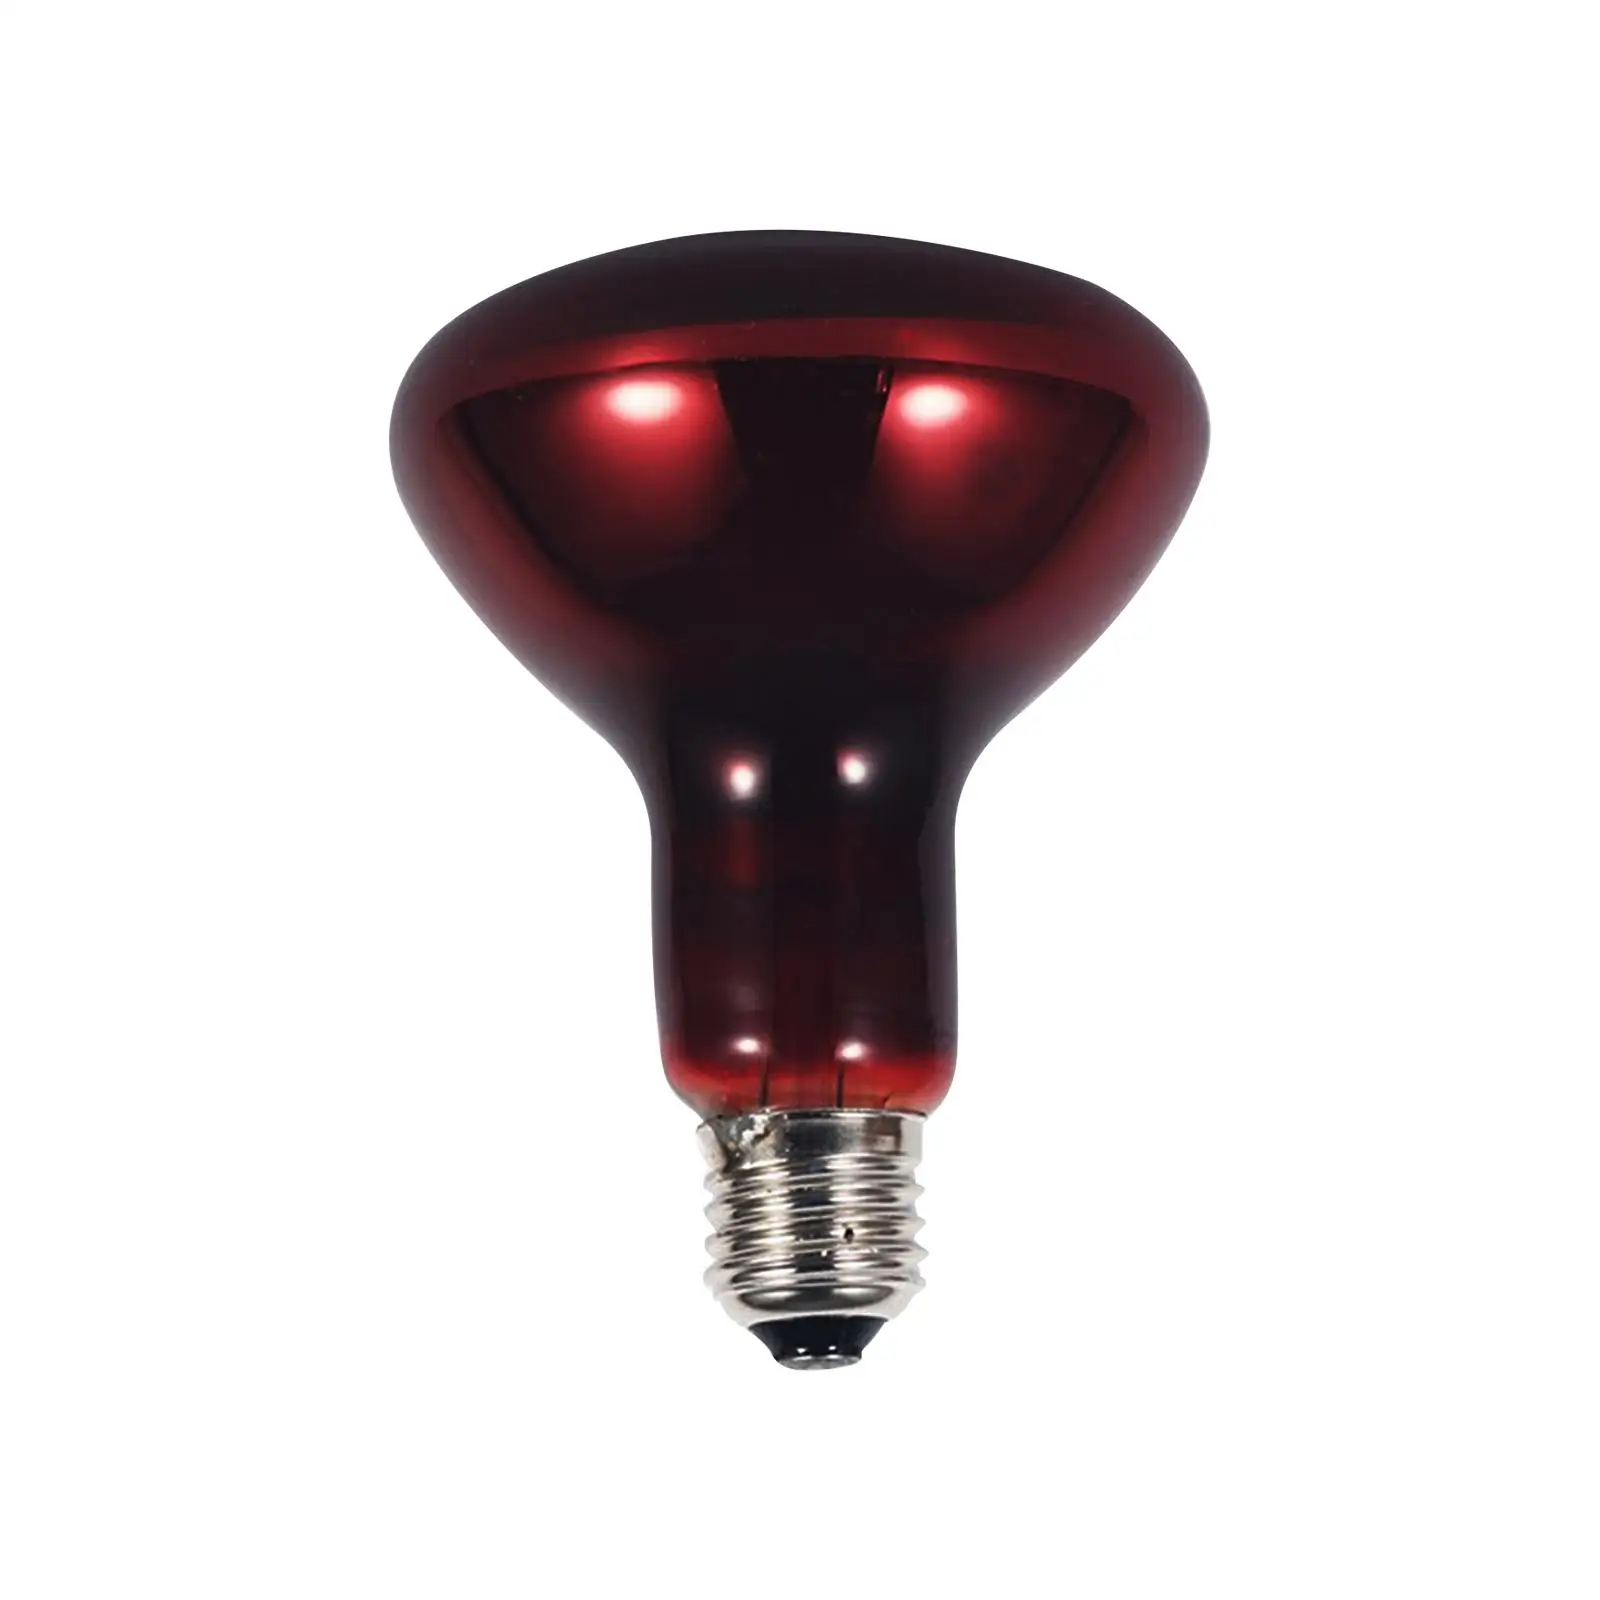 E27 Reptile Light Bulb Heat Lamp Warmer 100W Accessories Daylight Red for Bearded Dragon Hedgehogs Amphibians Home